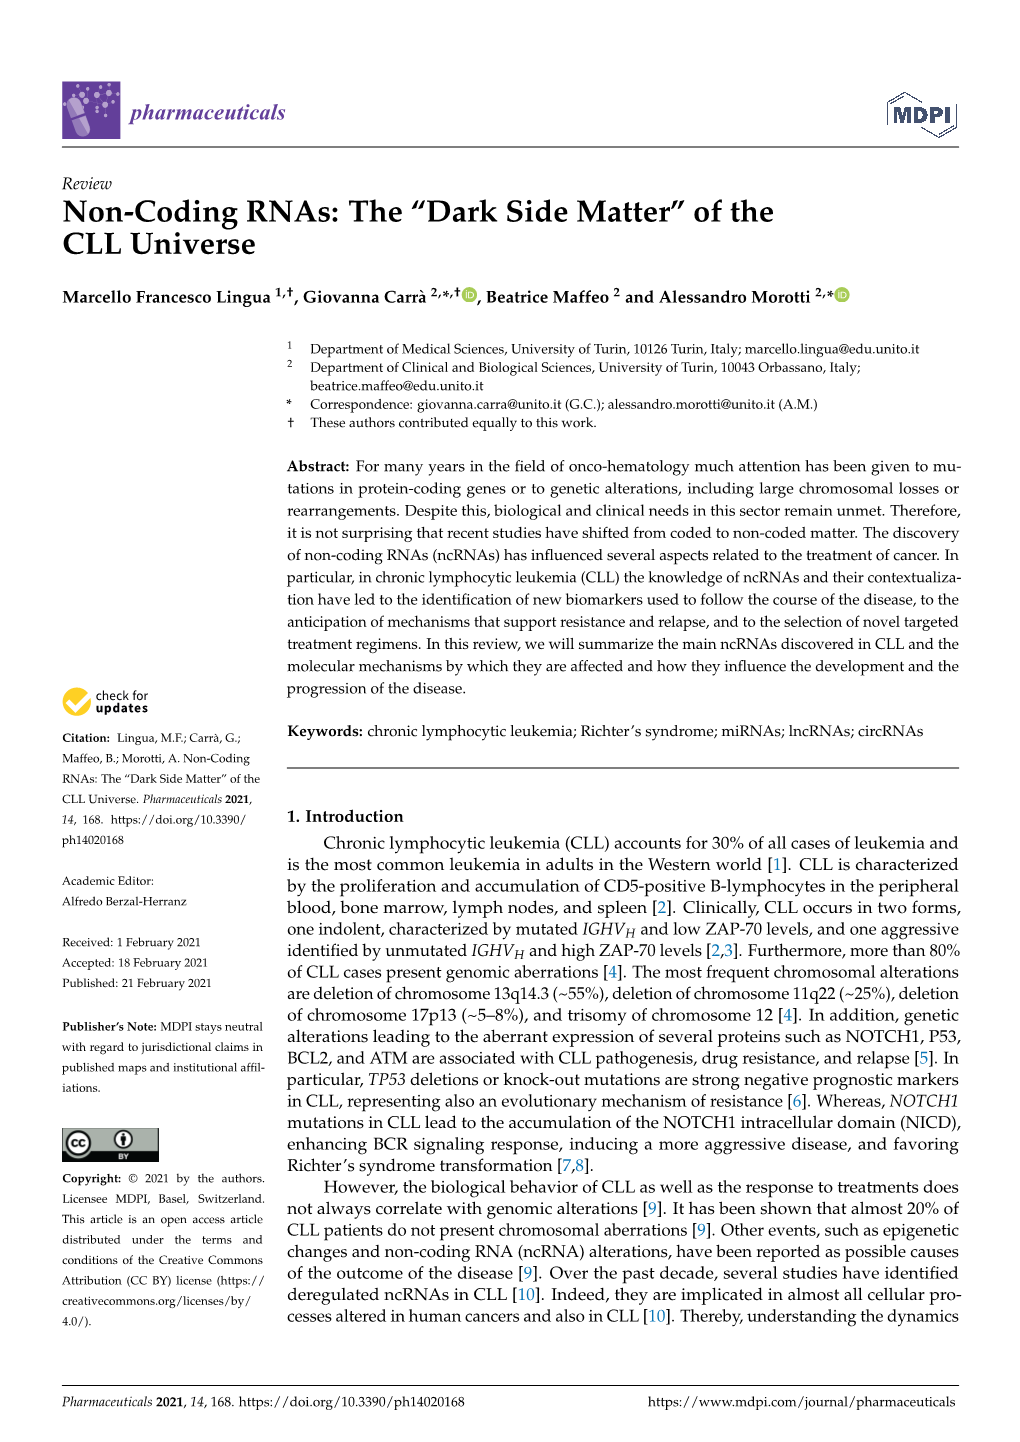 Non-Coding Rnas: the “Dark Side Matter” of the CLL Universe